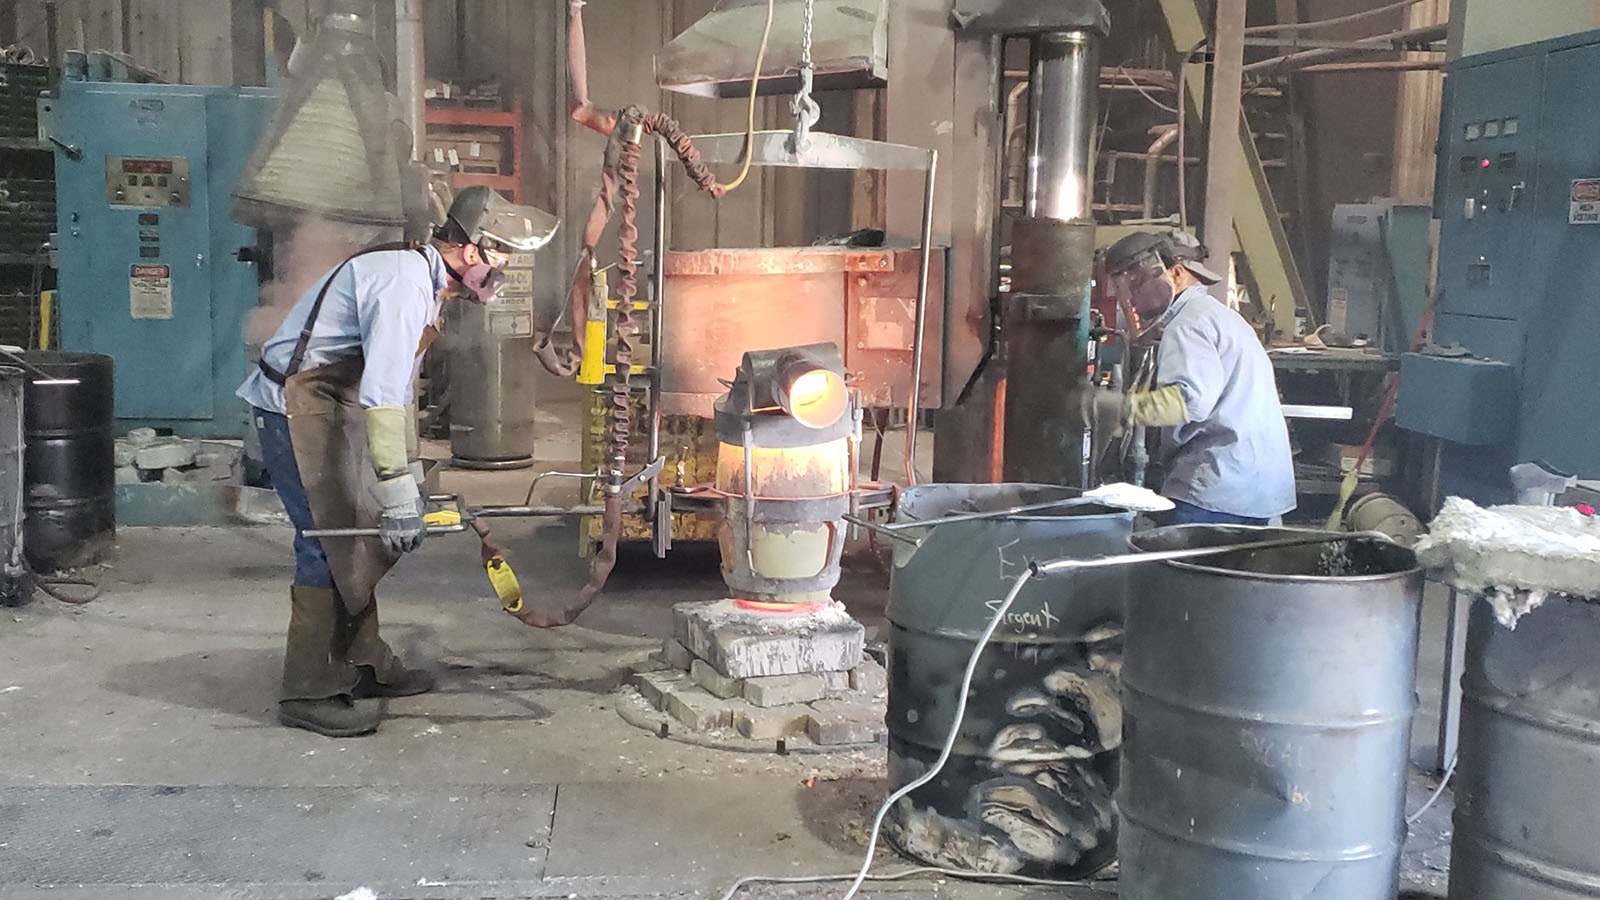 Work at the Excel Inc. foundry in Mills, Wyoming.